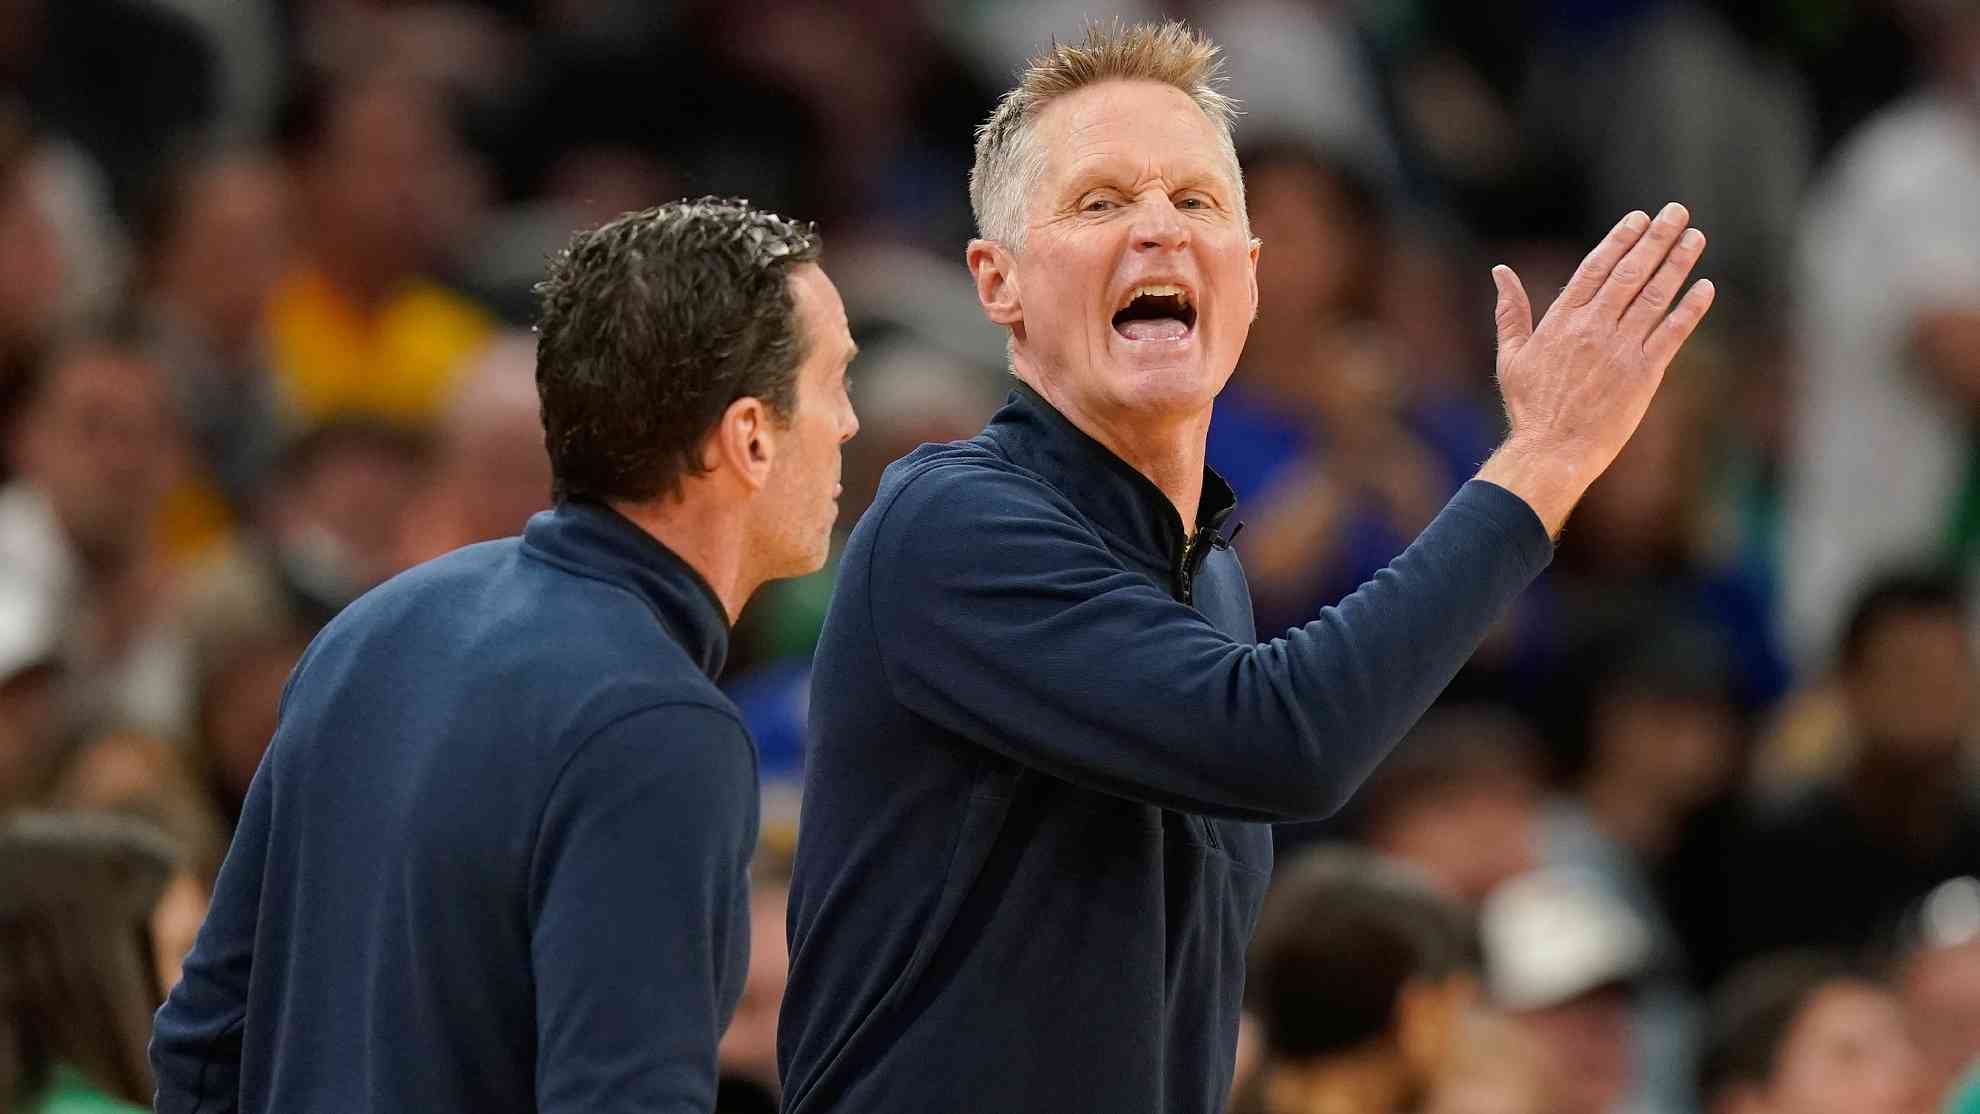 Steve Kerr: The Lord of the Rings of the NBA both as a coach and as a  player | Marca